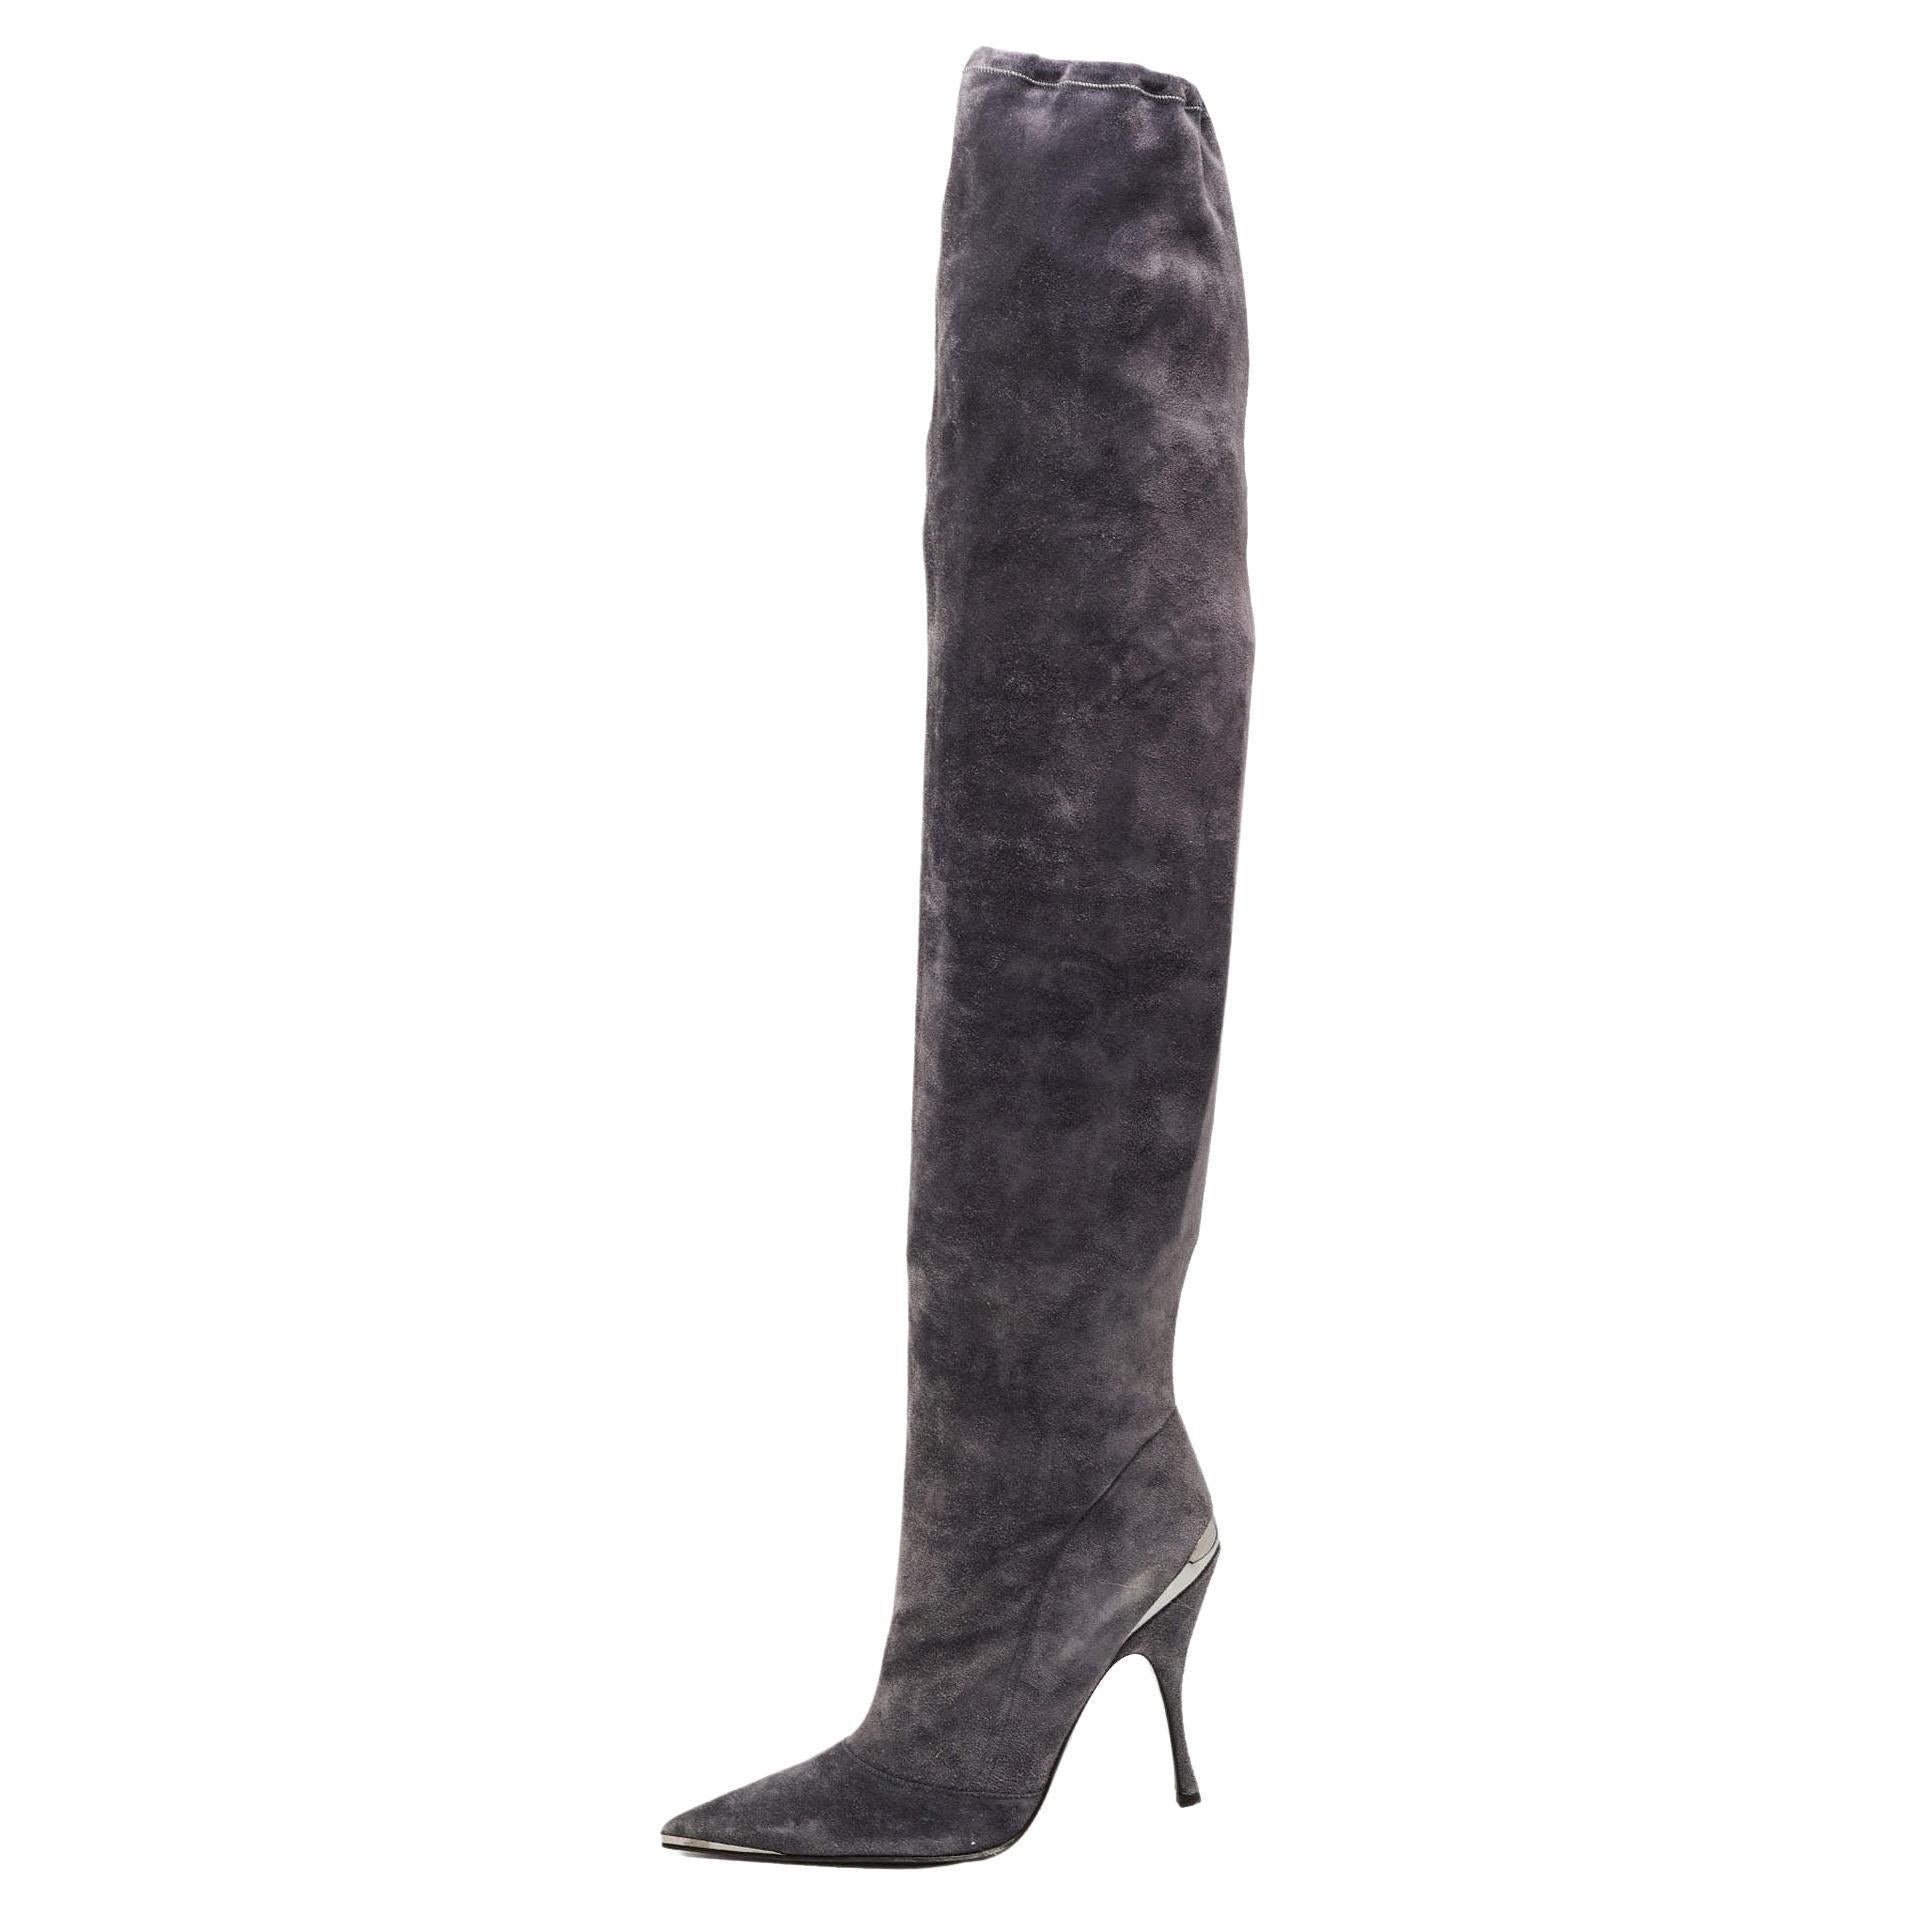 Dolce & Gabbana Grey Suede Knee Length Boots Size 41